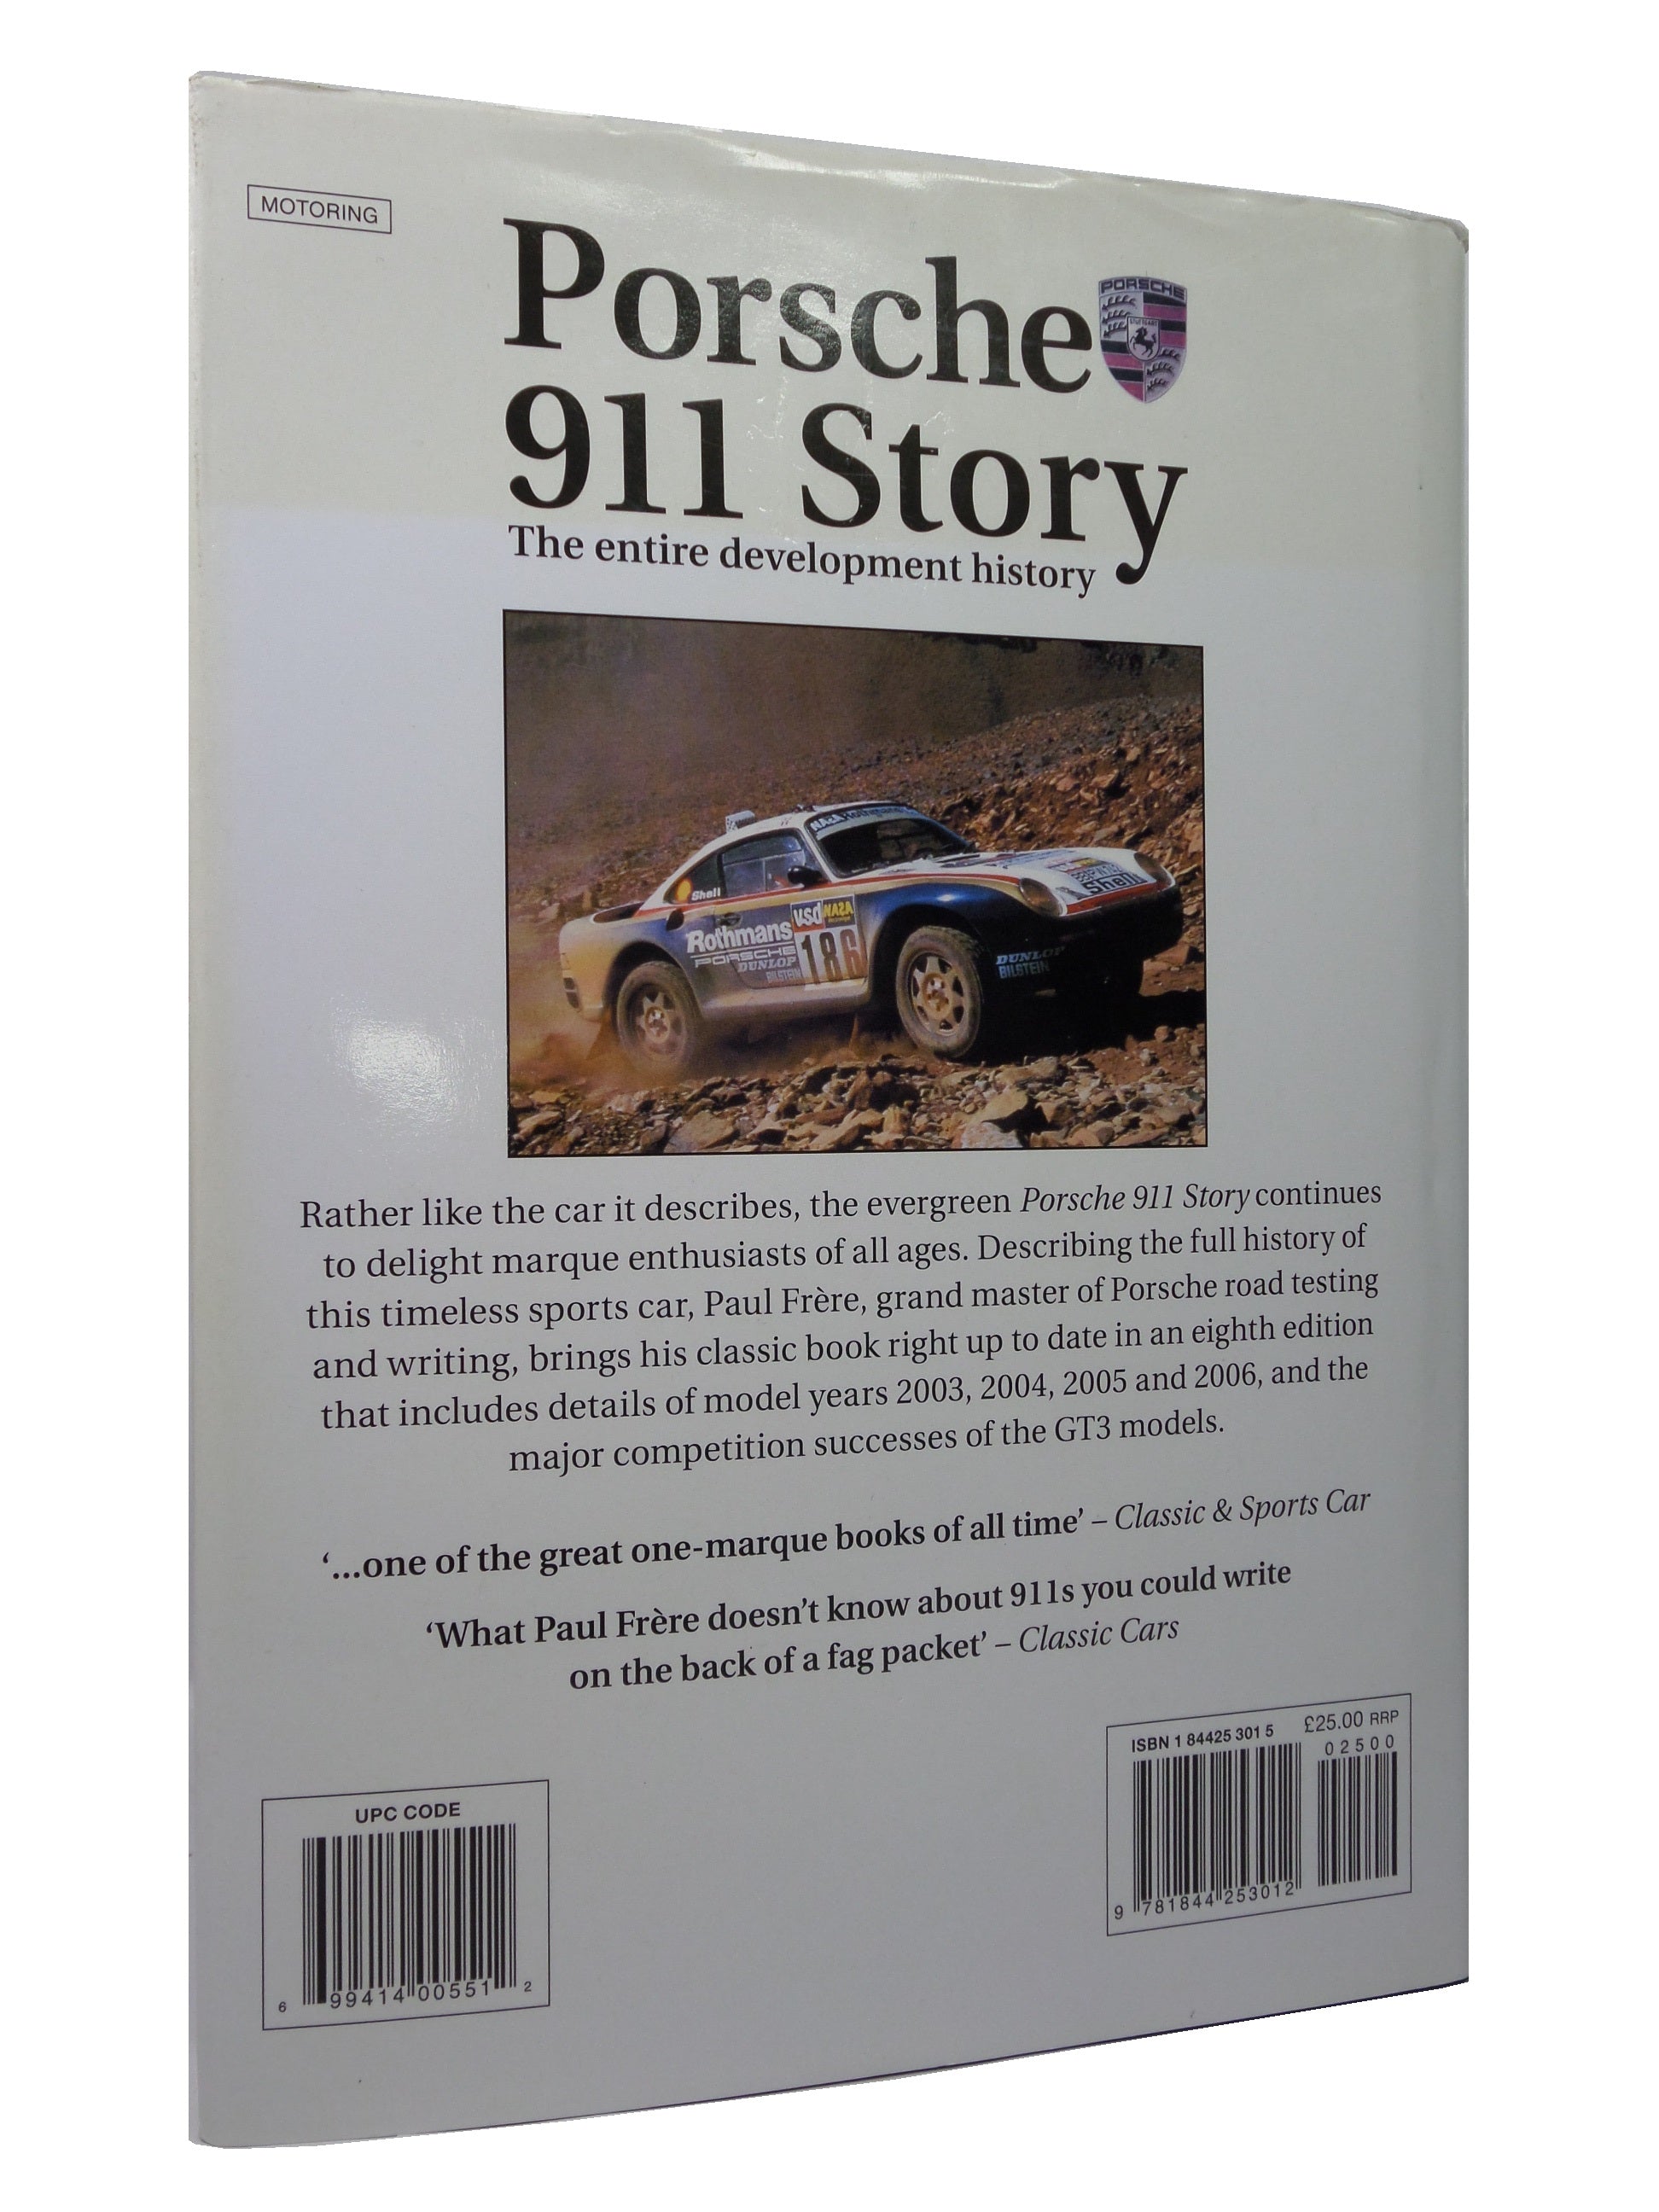 PORSCHE 911 STORY BY PAUL FRERE 2006 EIGHTH EDITION HARDBACK